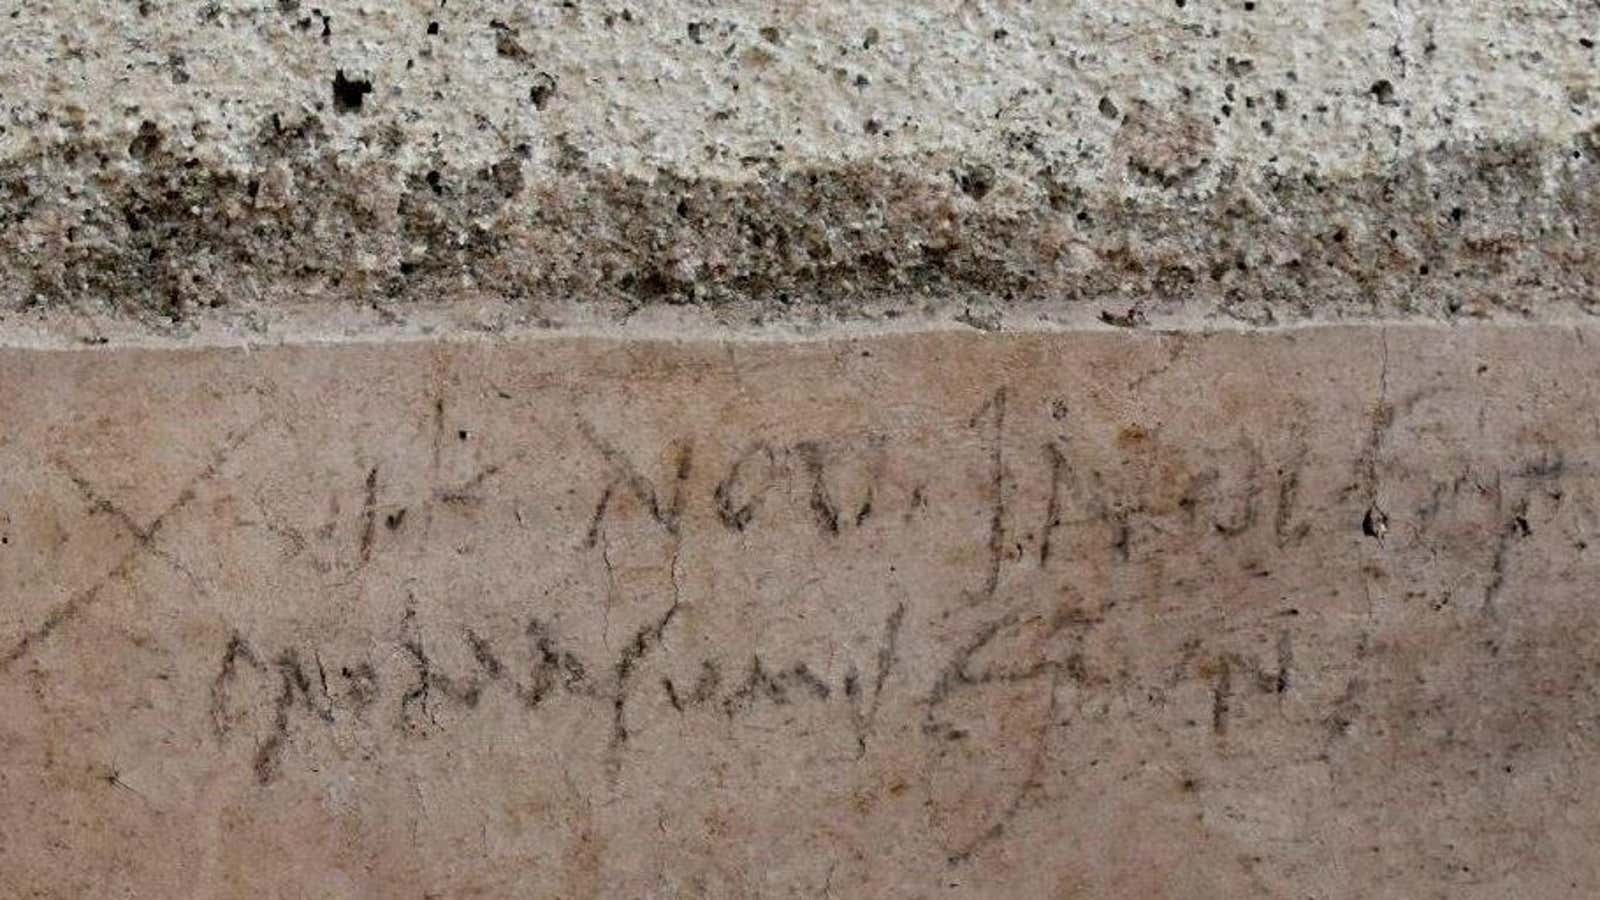 Graffiti, likely scribbled by a construction worker millennia ago in Pompeii.